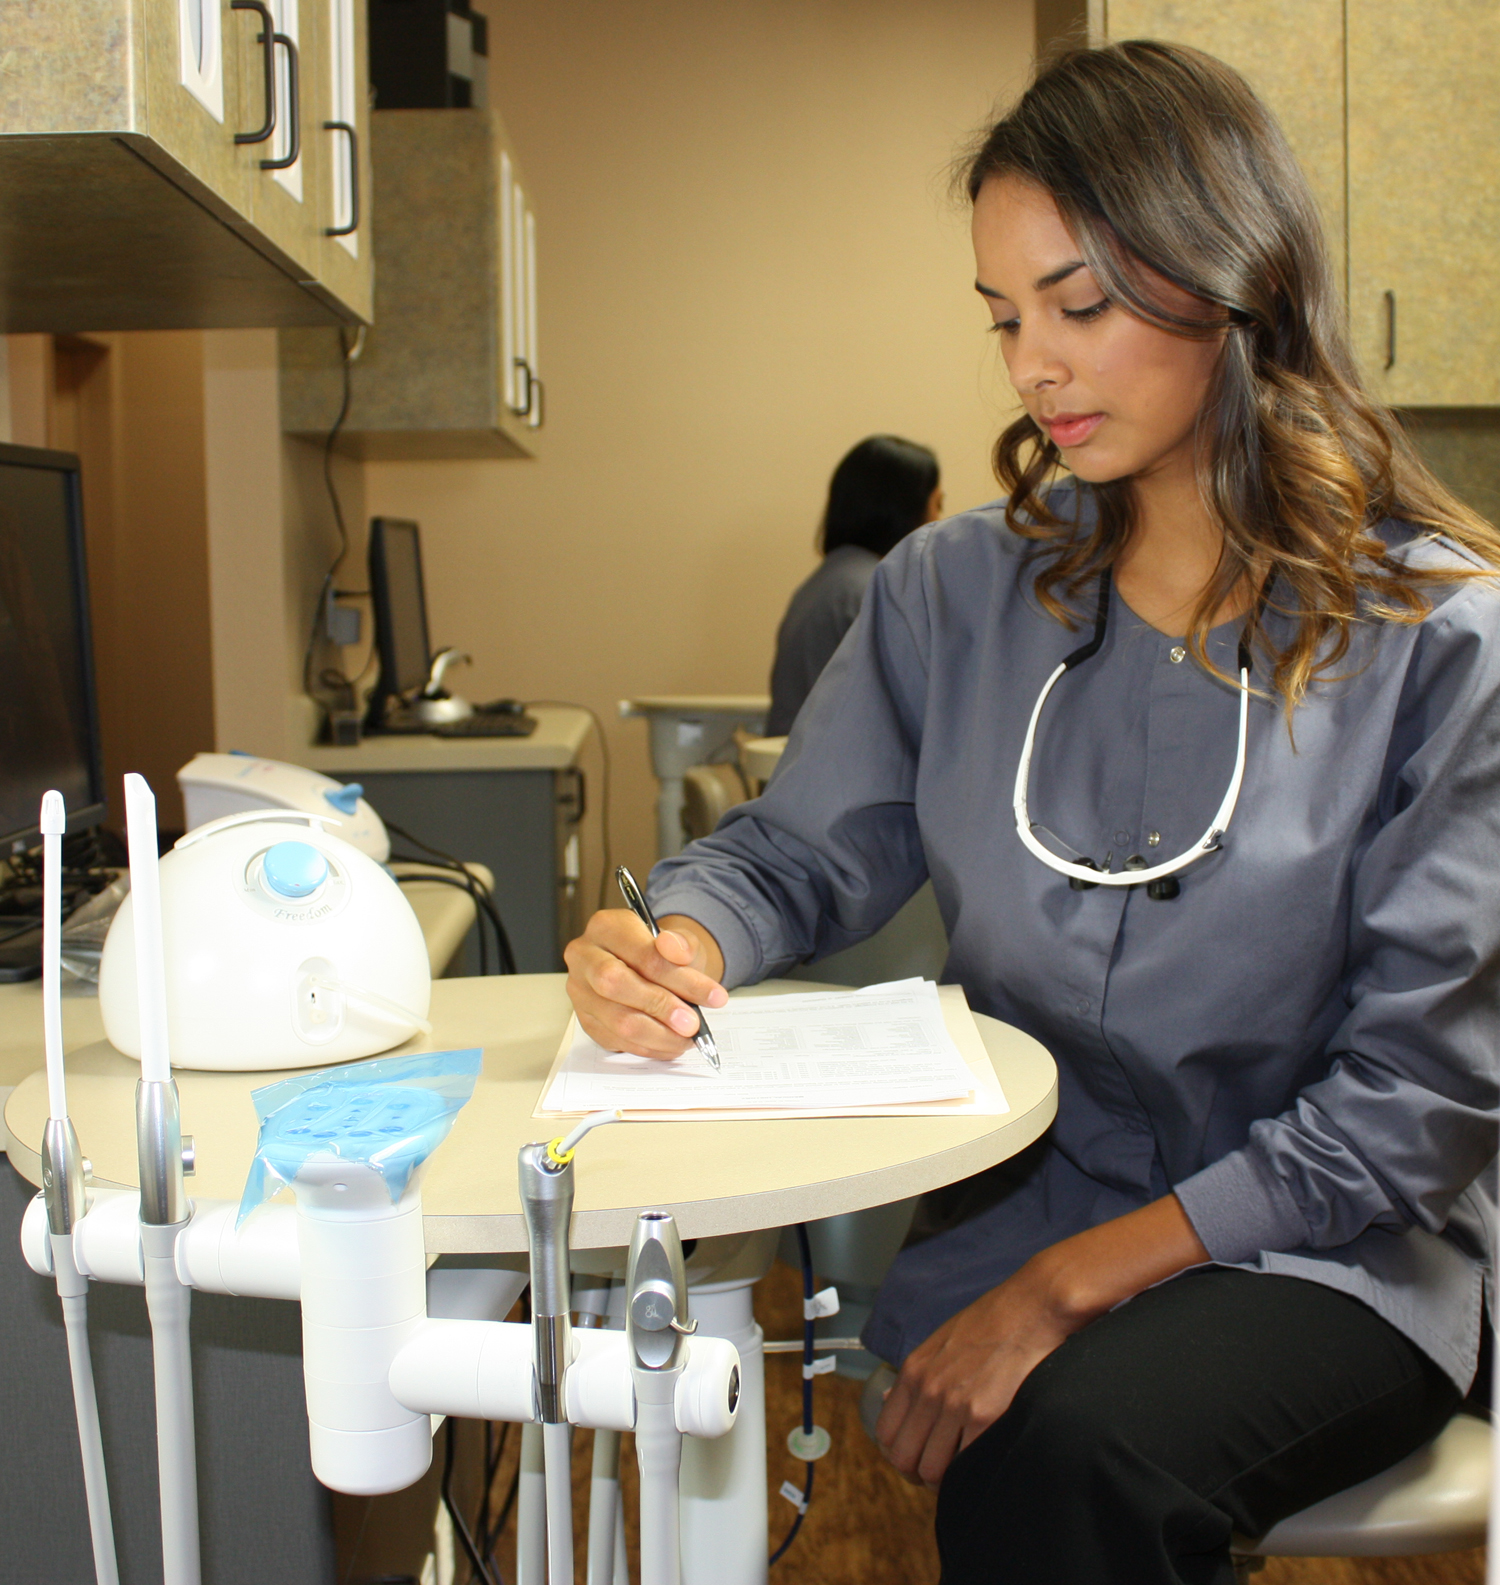 Dental assistant uses breast pump with clothes on while working